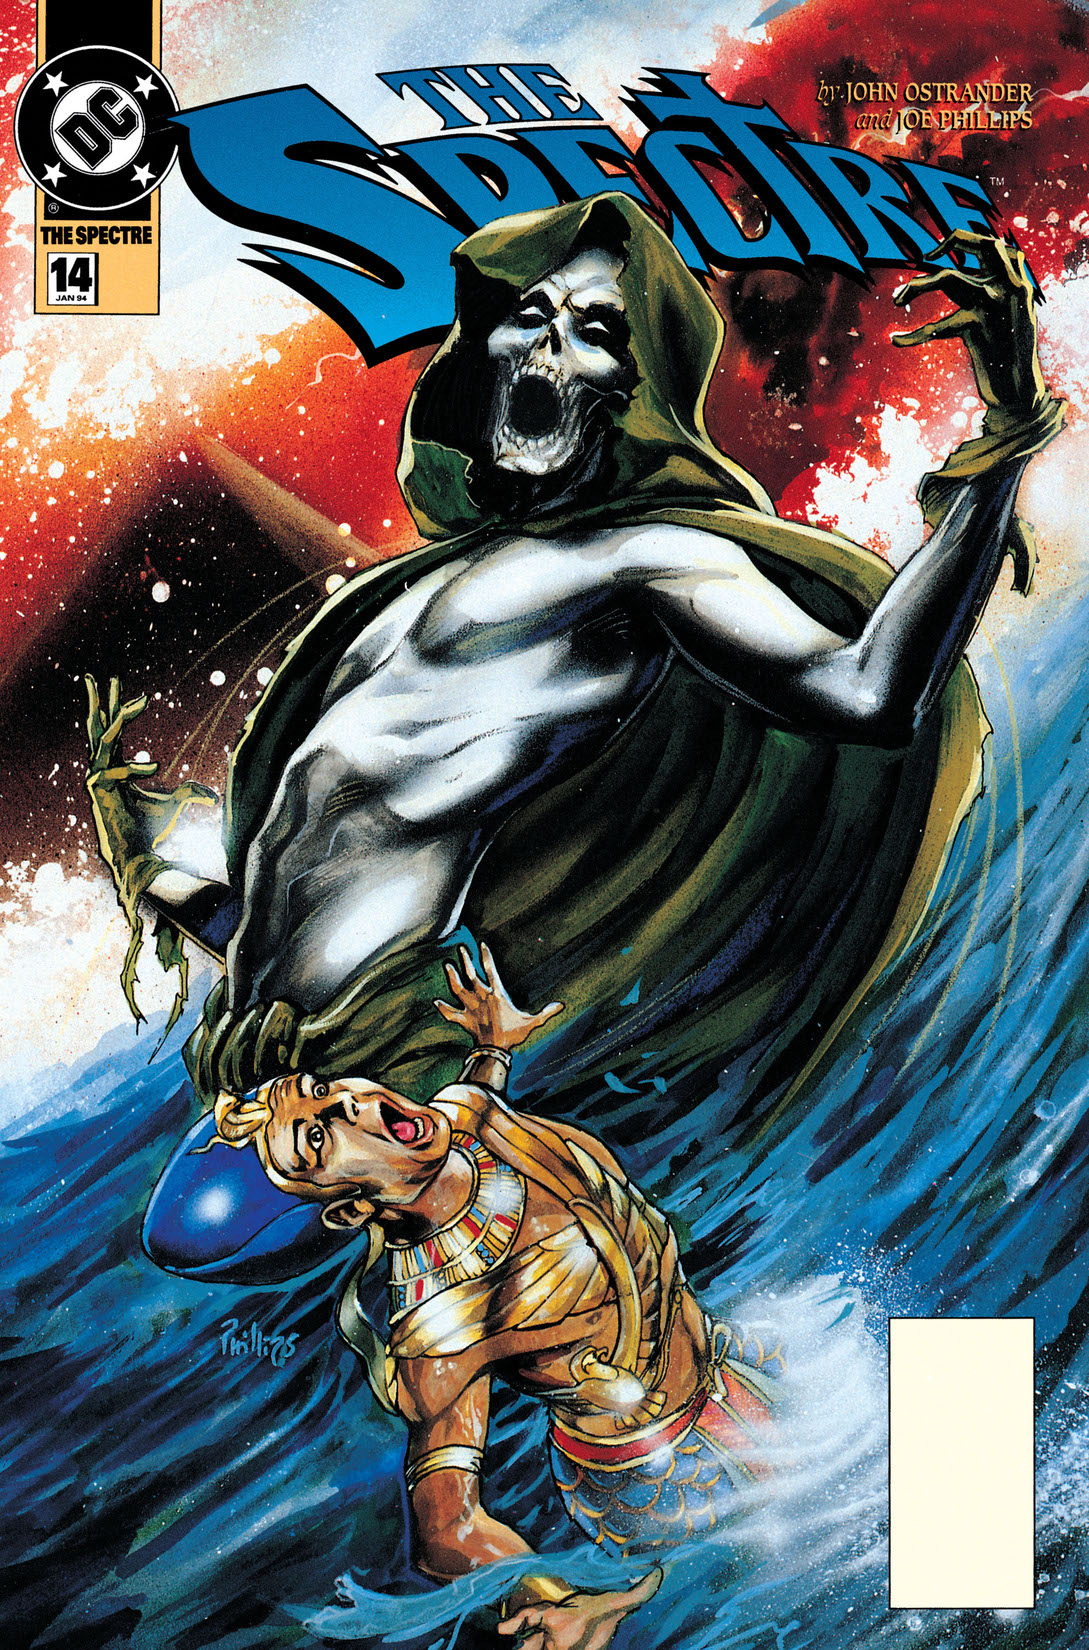 The Spectre (1992-) #14 preview images